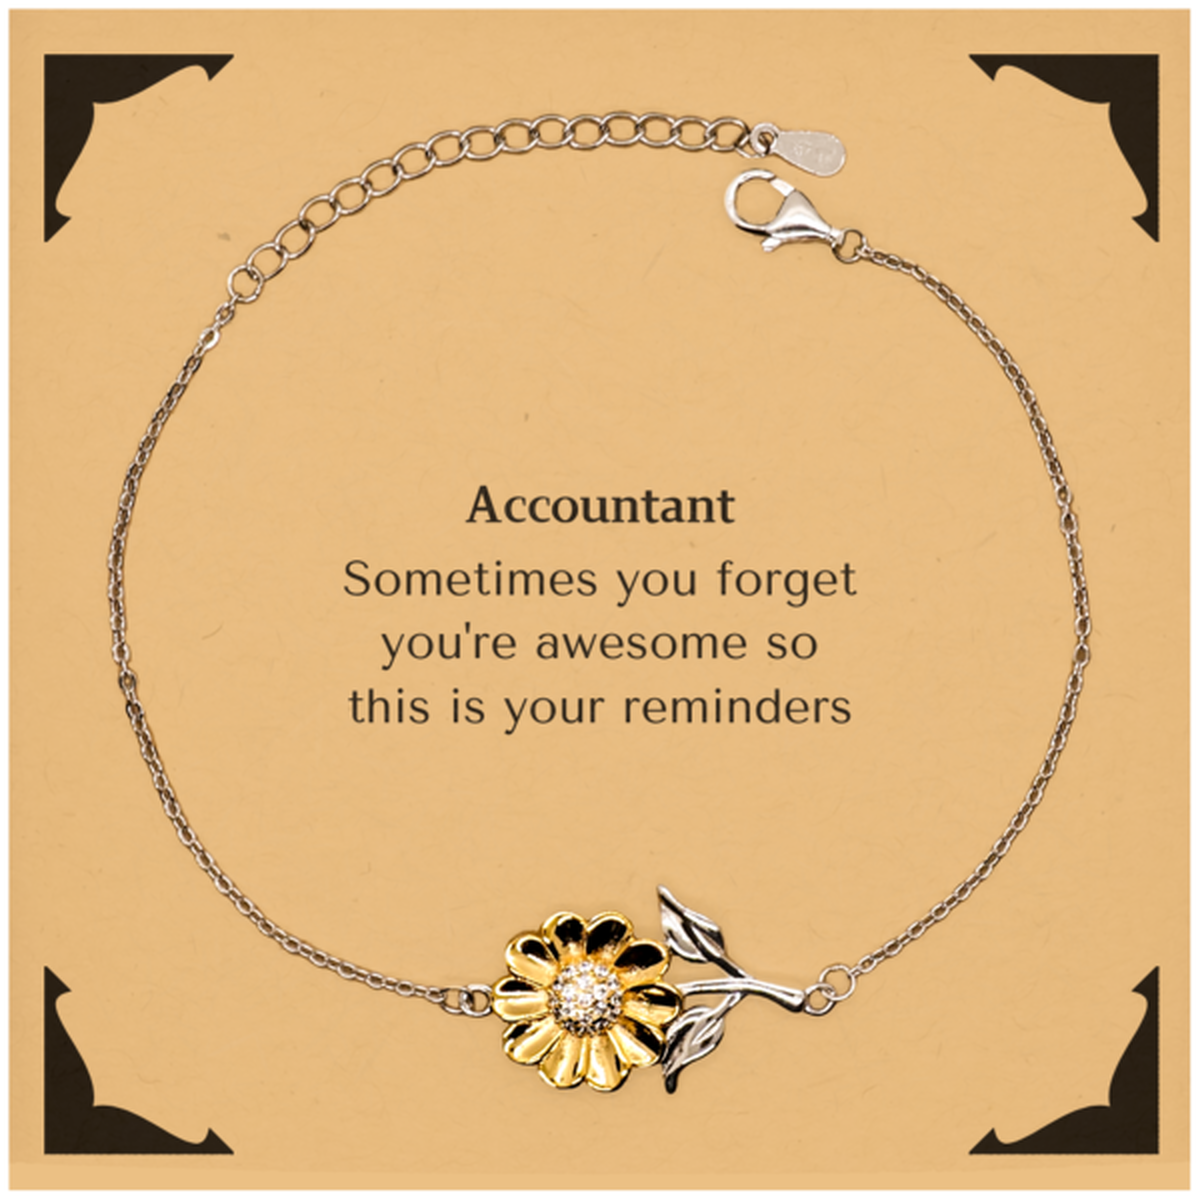 Sentimental Accountant Sunflower Bracelet, Accountant Sometimes you forget you're awesome so this is your reminders, Graduation Christmas Birthday Gifts for Accountant, Men, Women, Coworkers